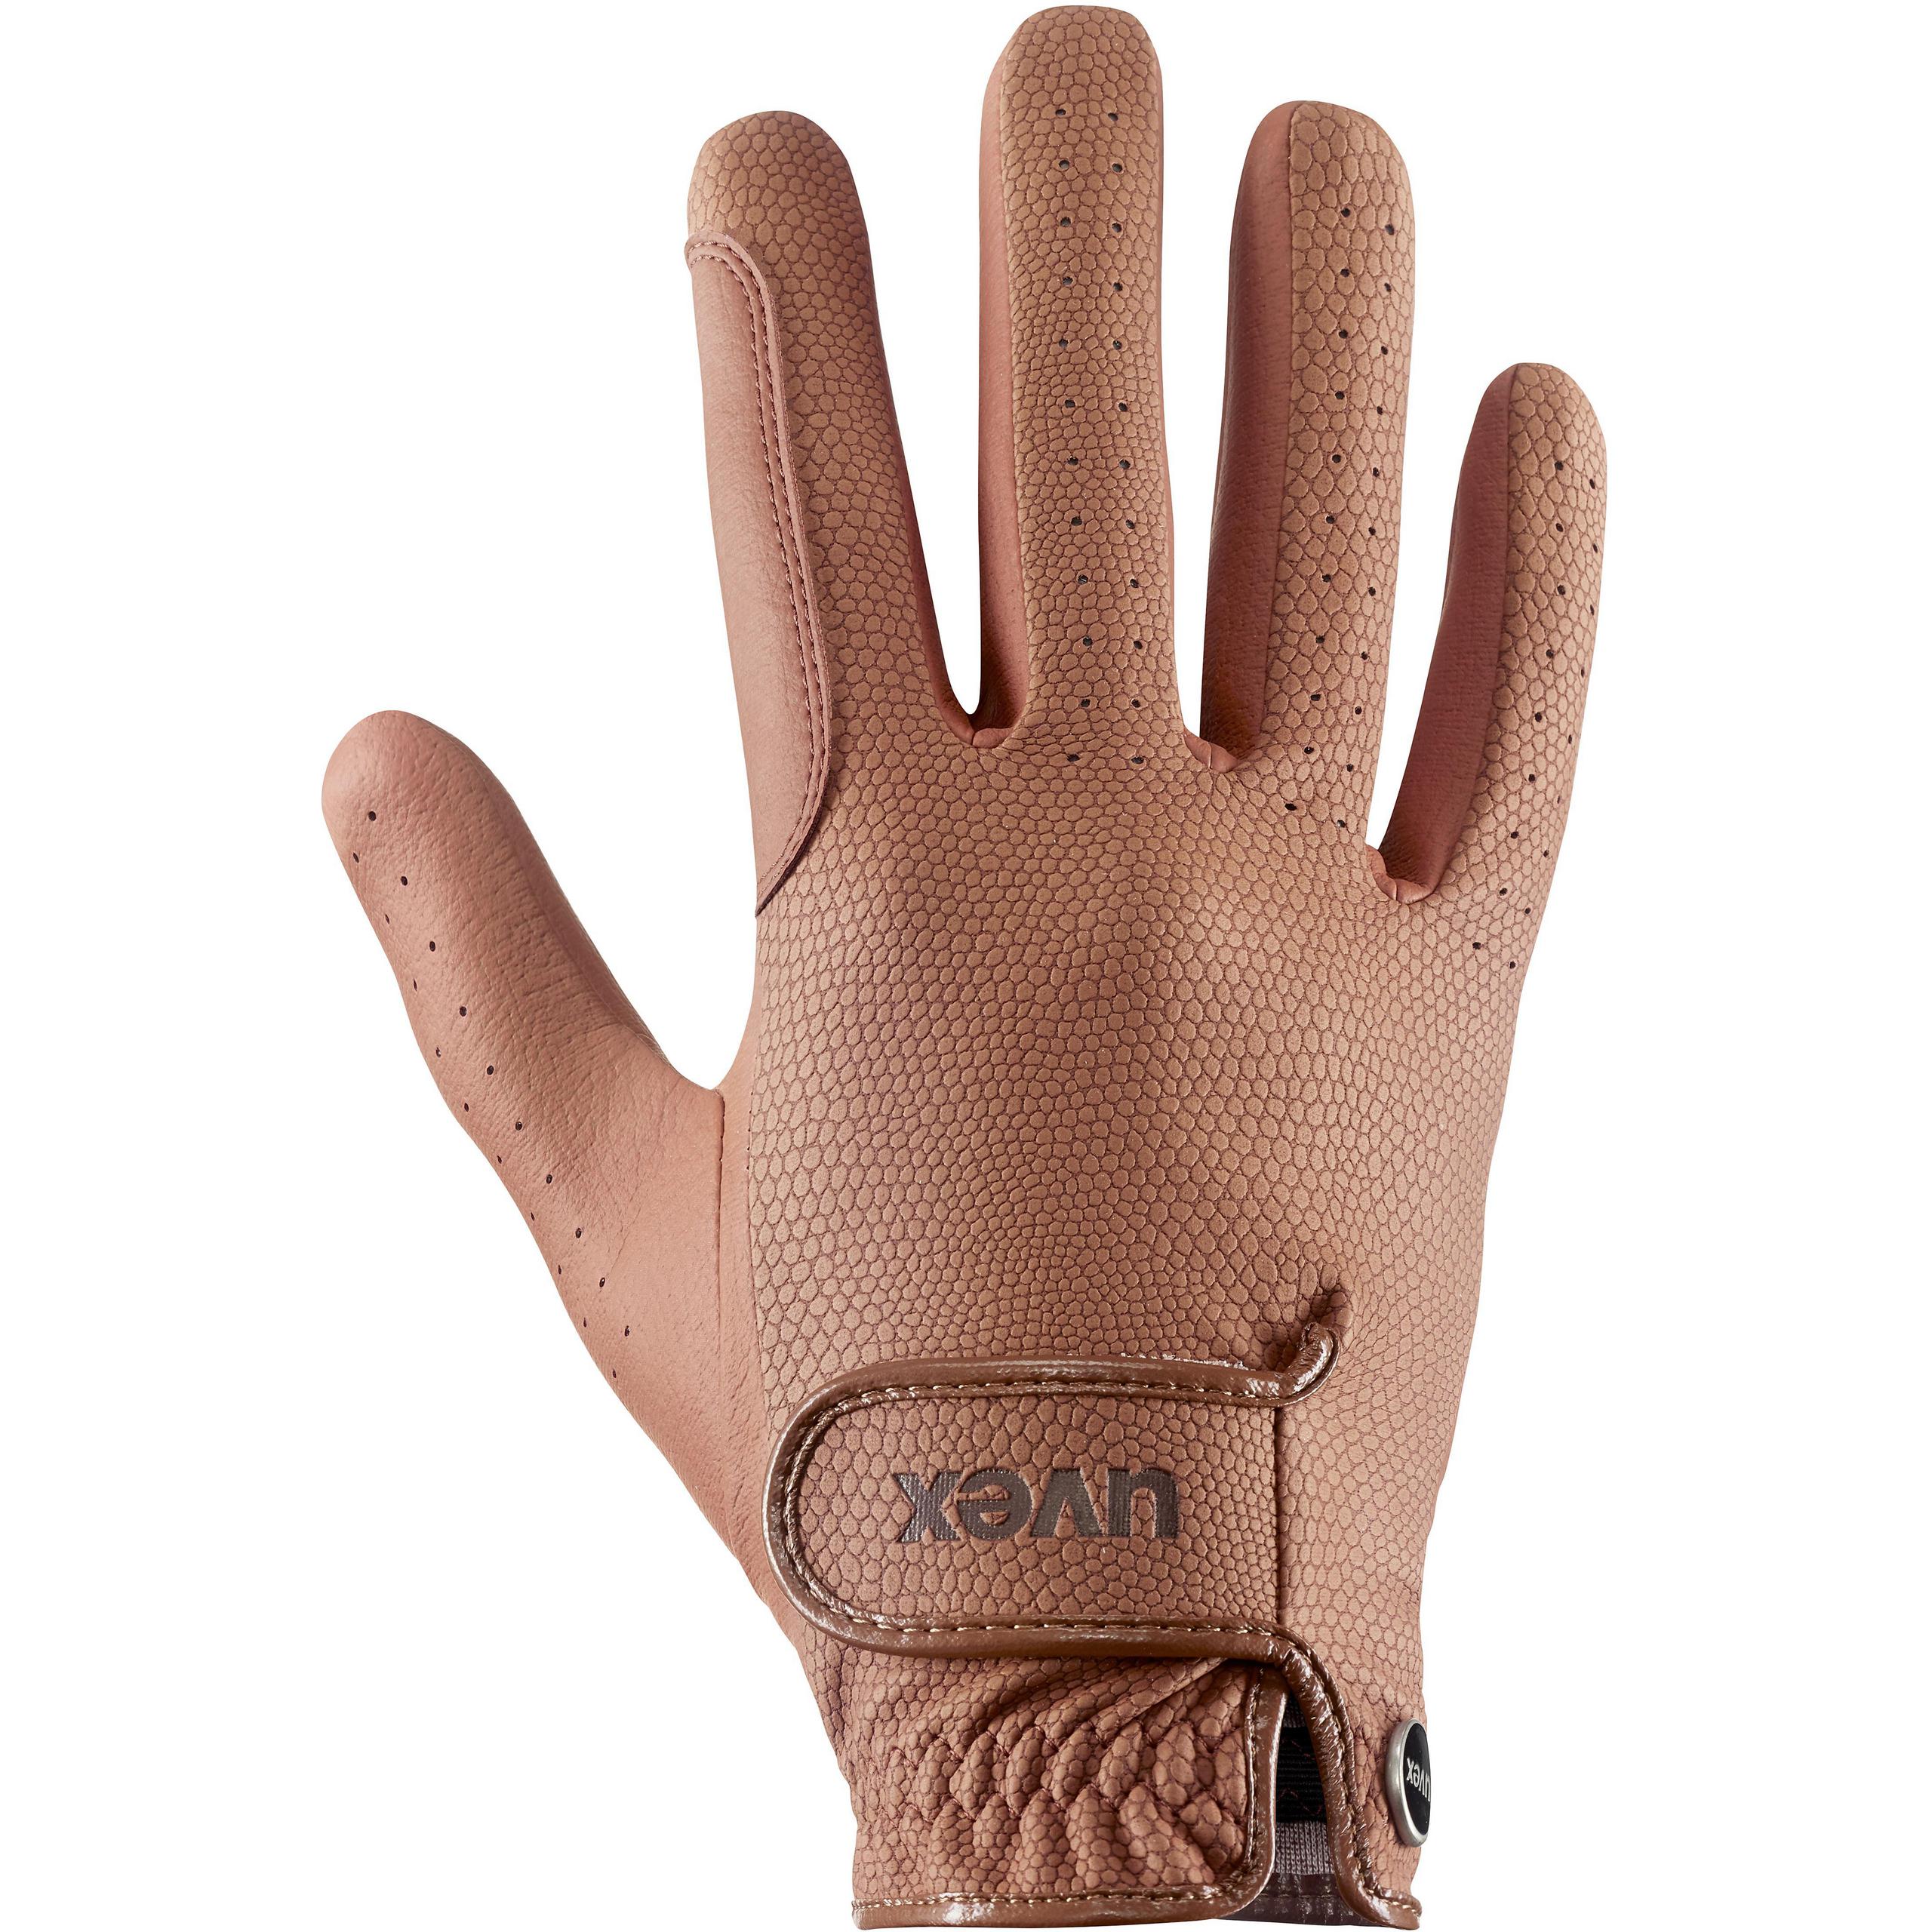 UVEX Ventraxion Riding Gloves Breathable Soft-Touch Flexible Material 